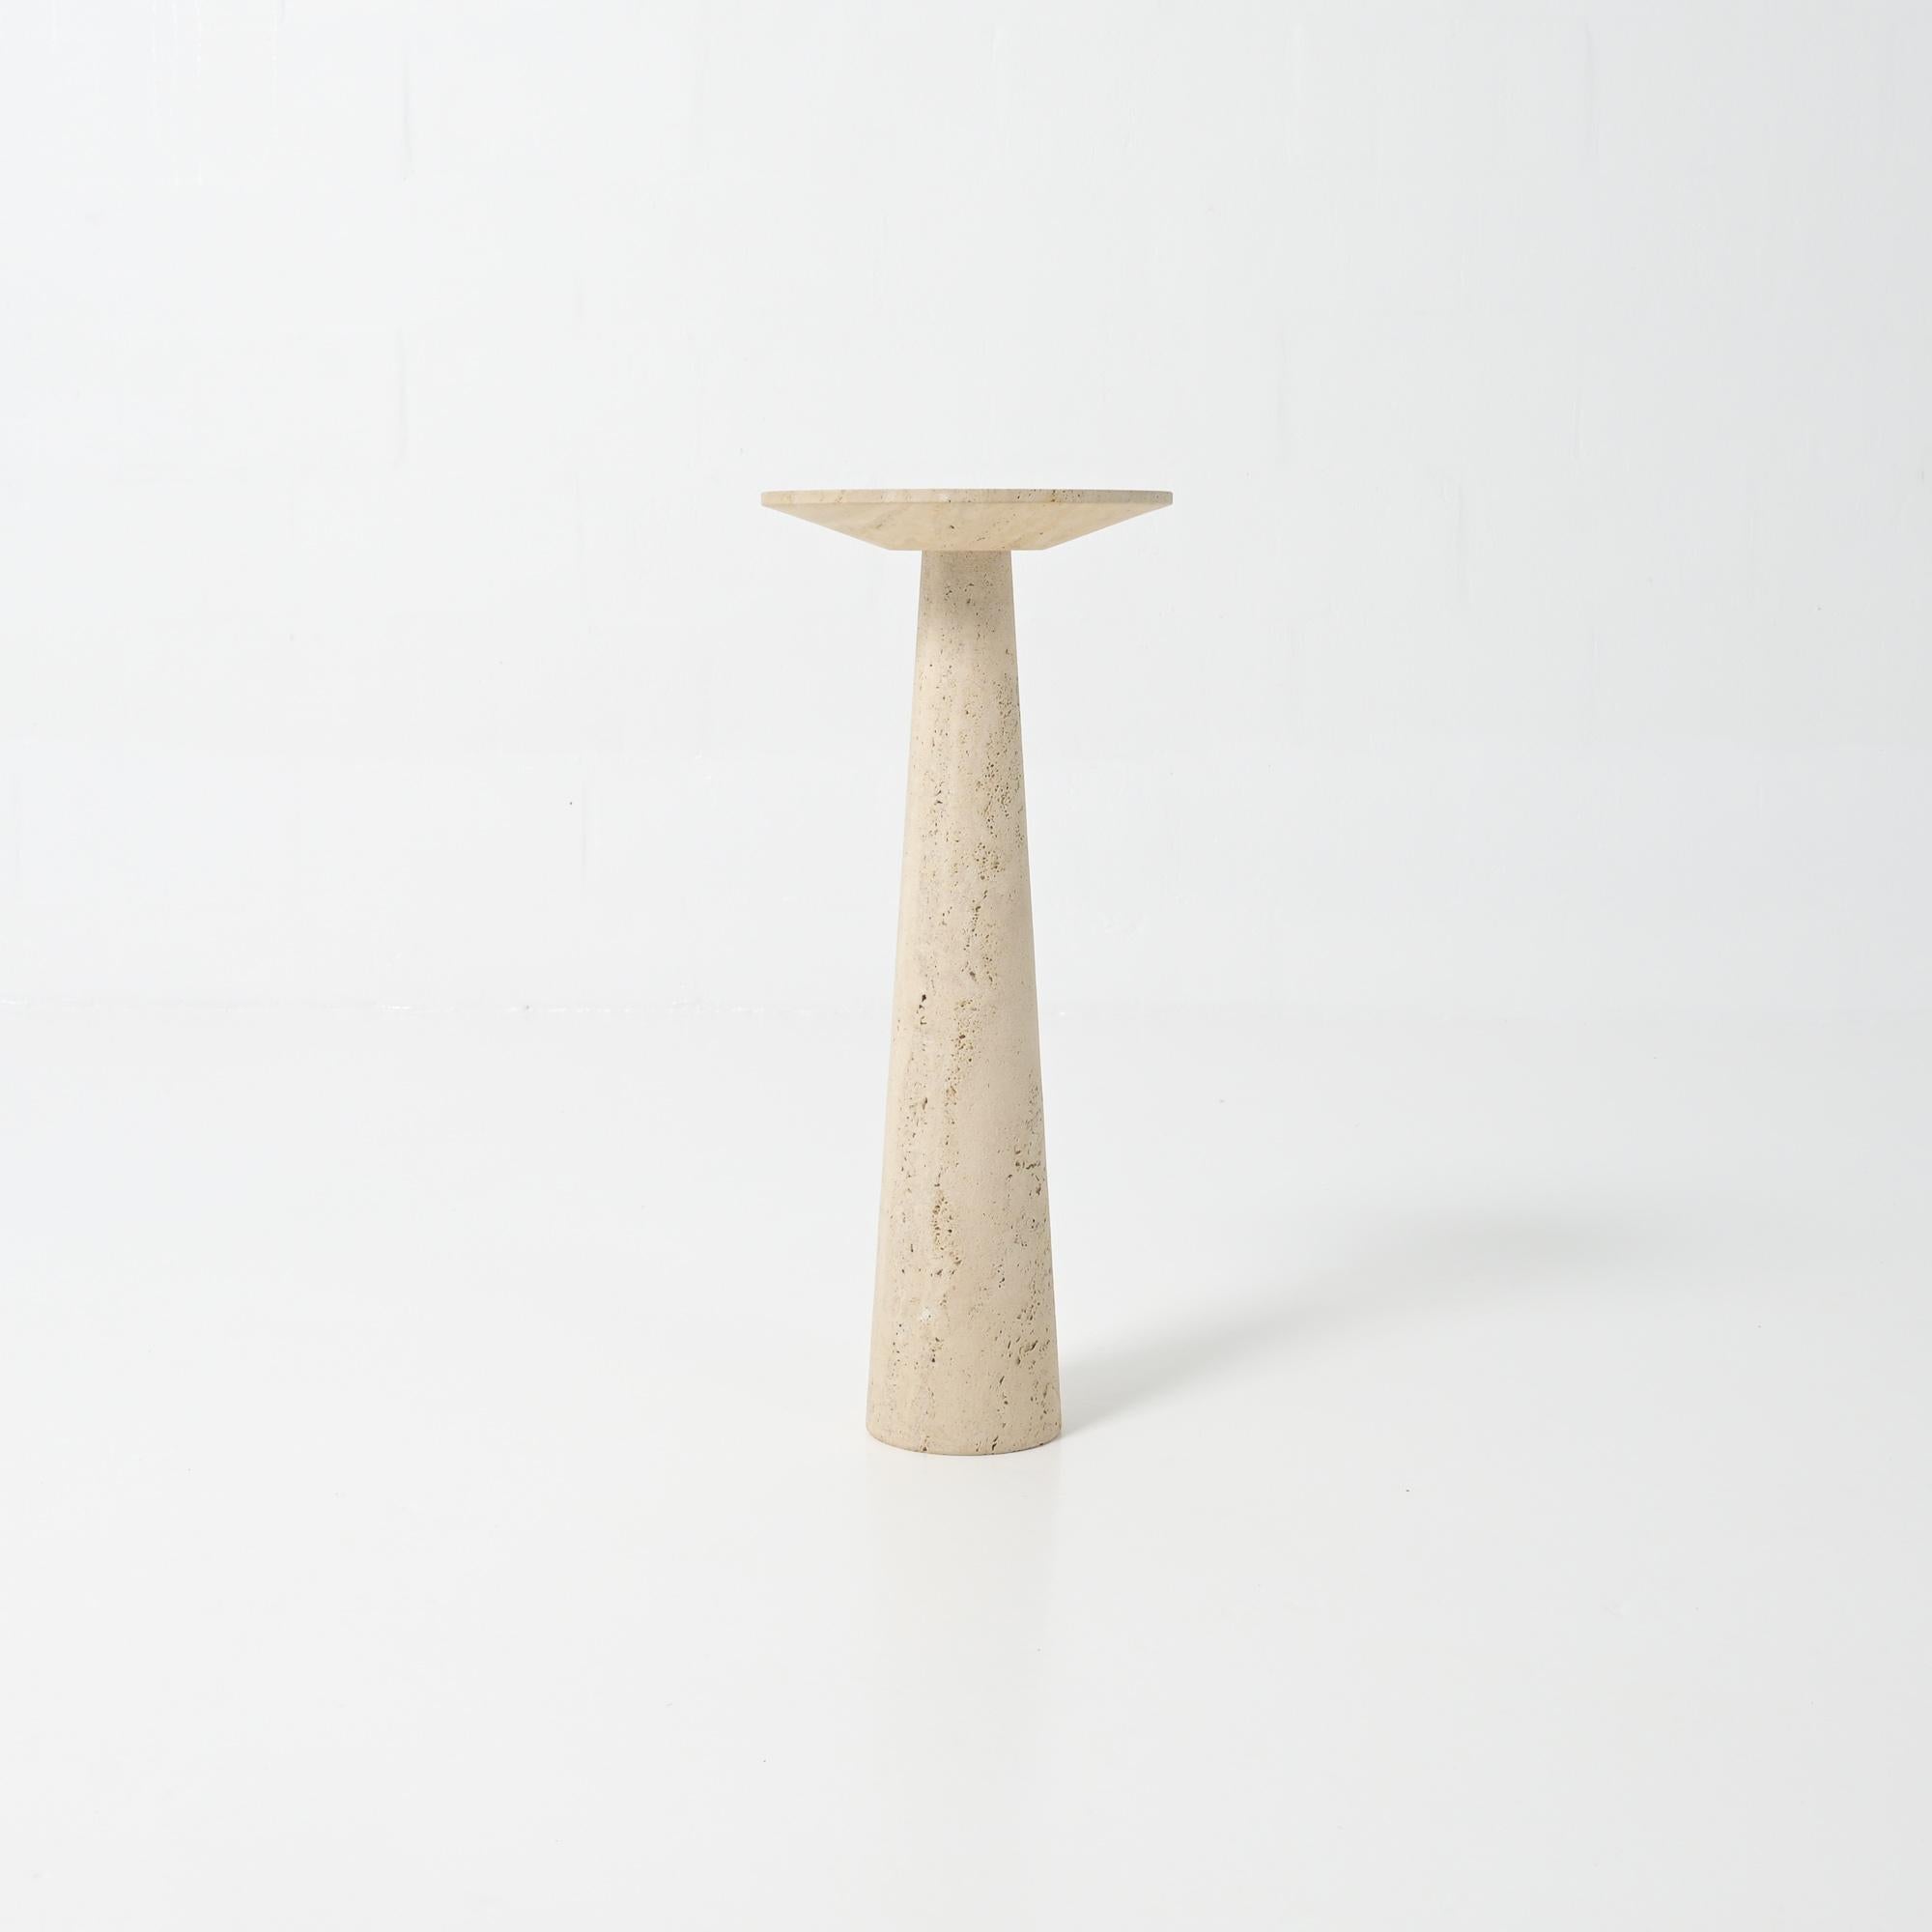 Late 20th Century Elegant travertine Console Table by P. A. Giusti & E. Di Rosa for Up & Up